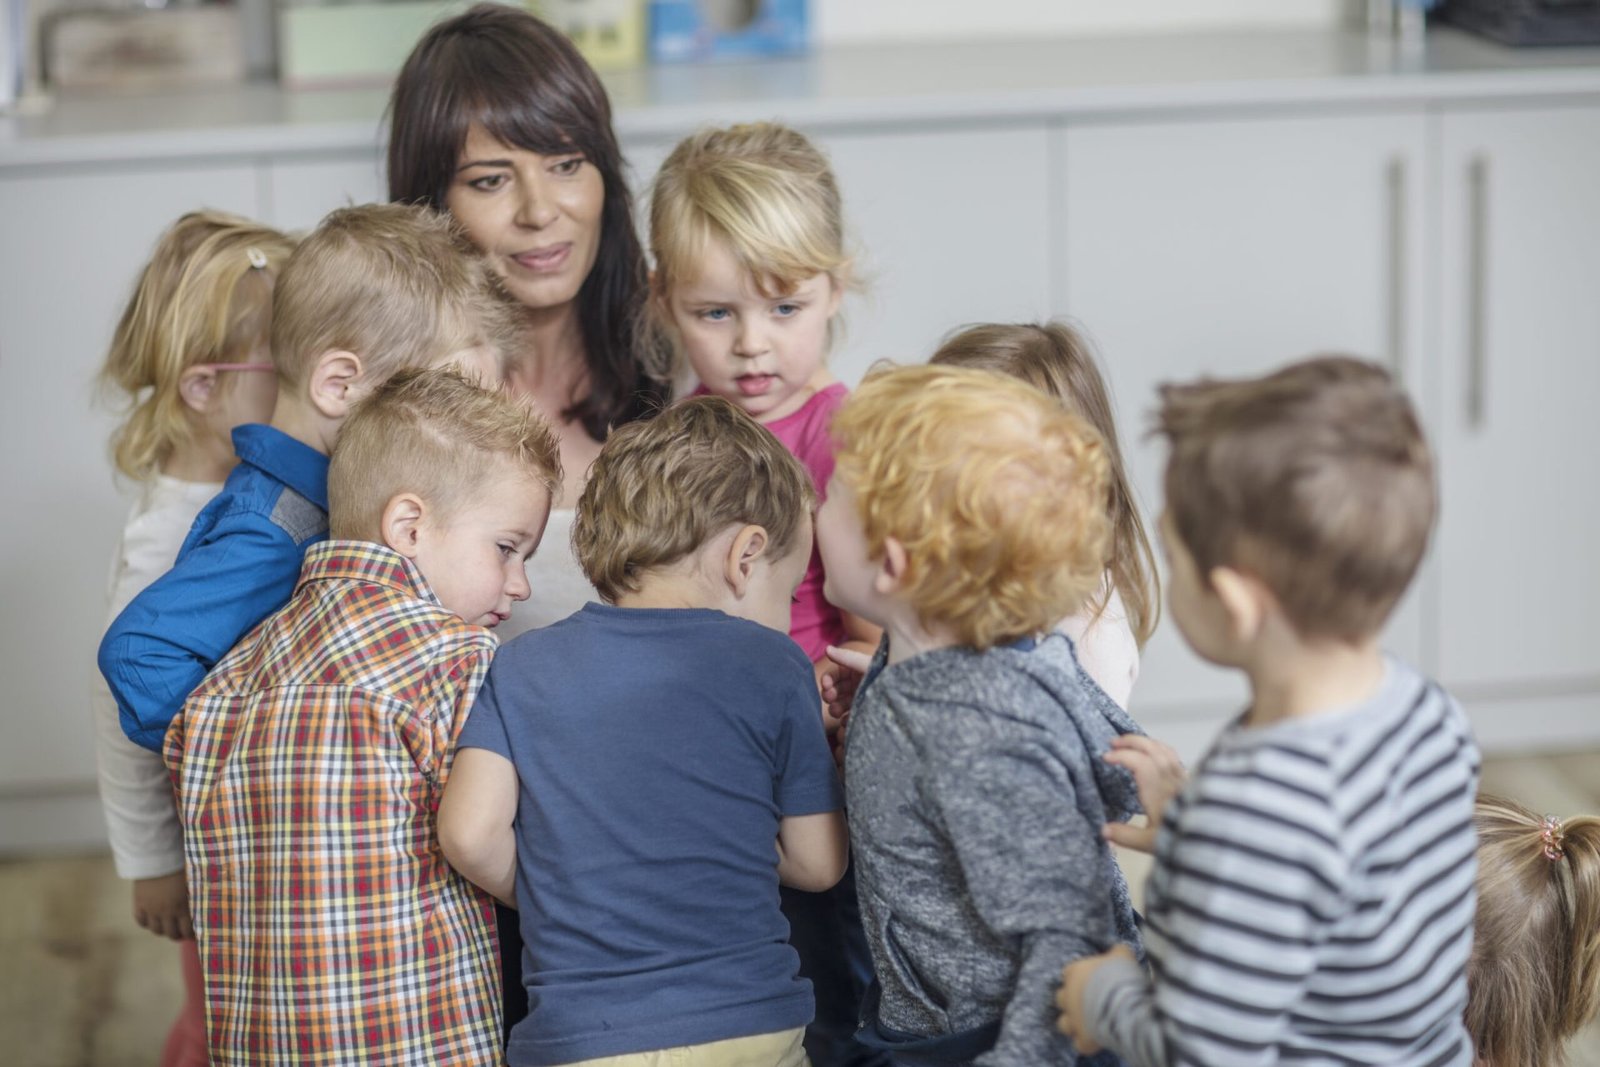 Teacher in classroom, surrounded by young children